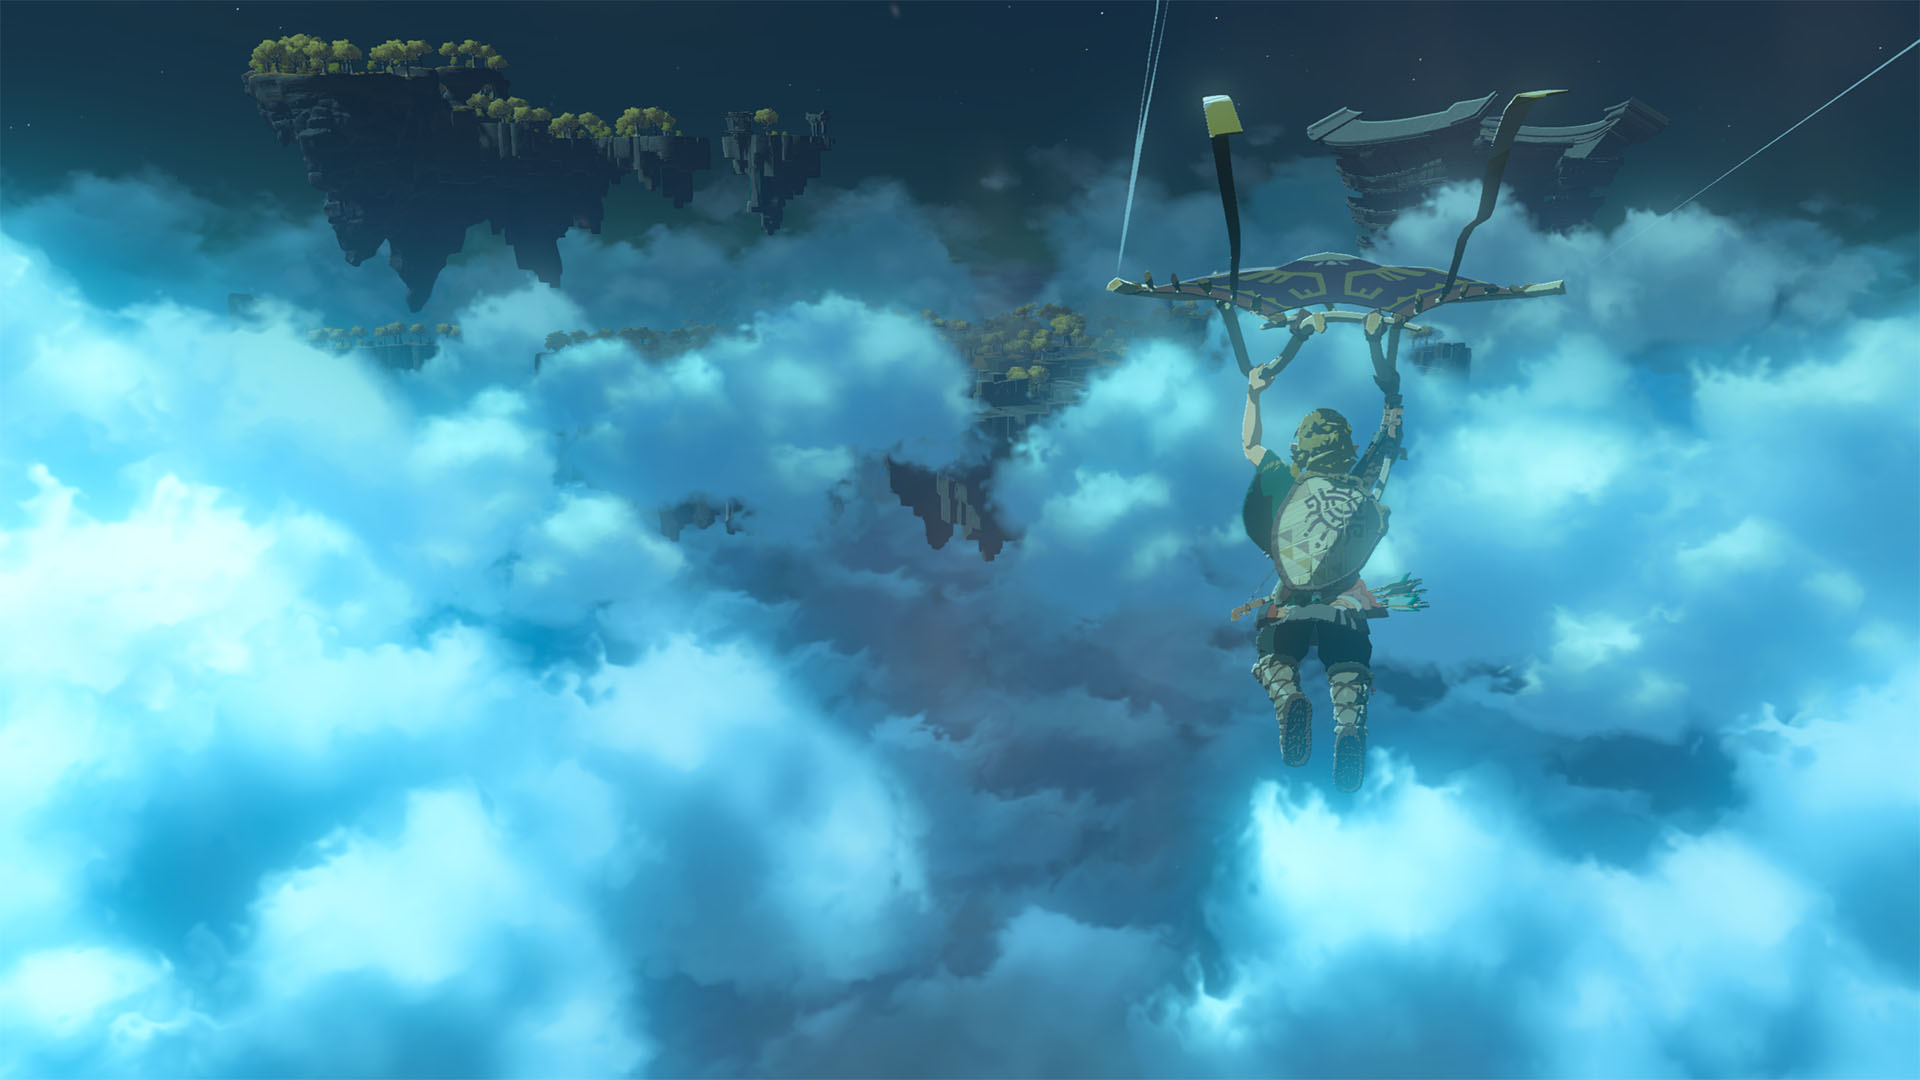 Link paragliding through the clouds over Hyrule